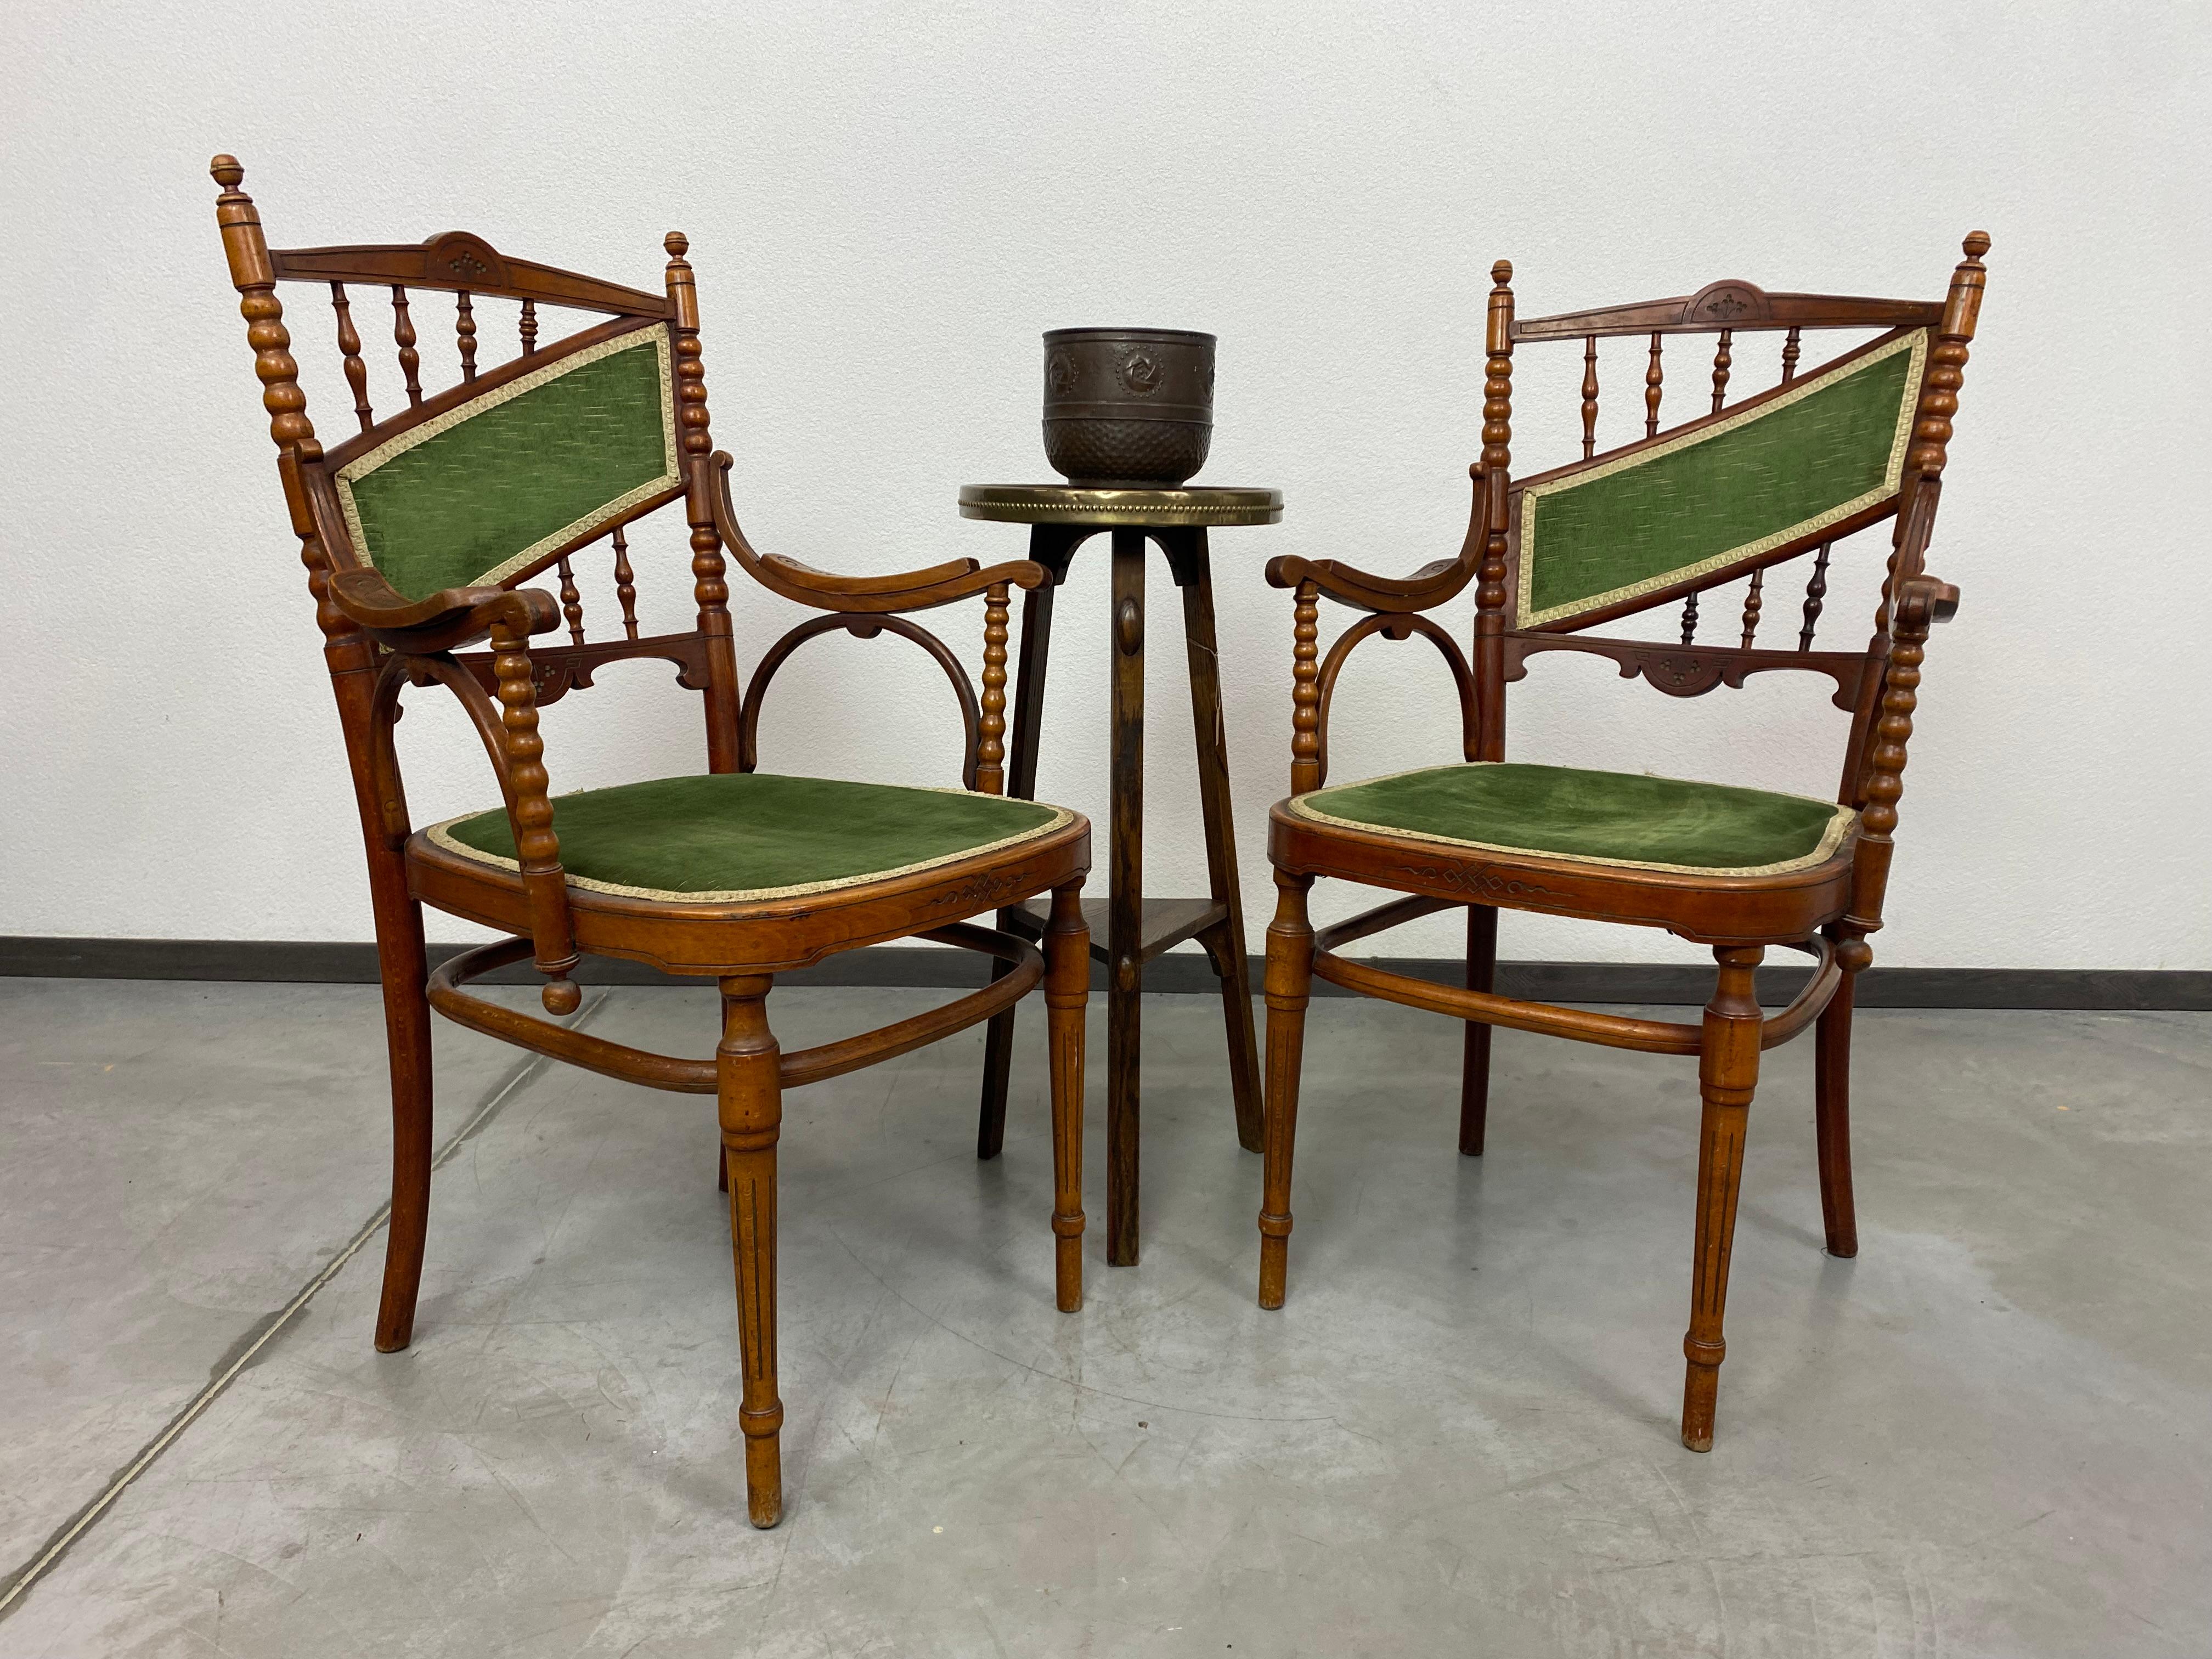 Jugendstil armchairs by J&J Kohn in original condition with signs of use.